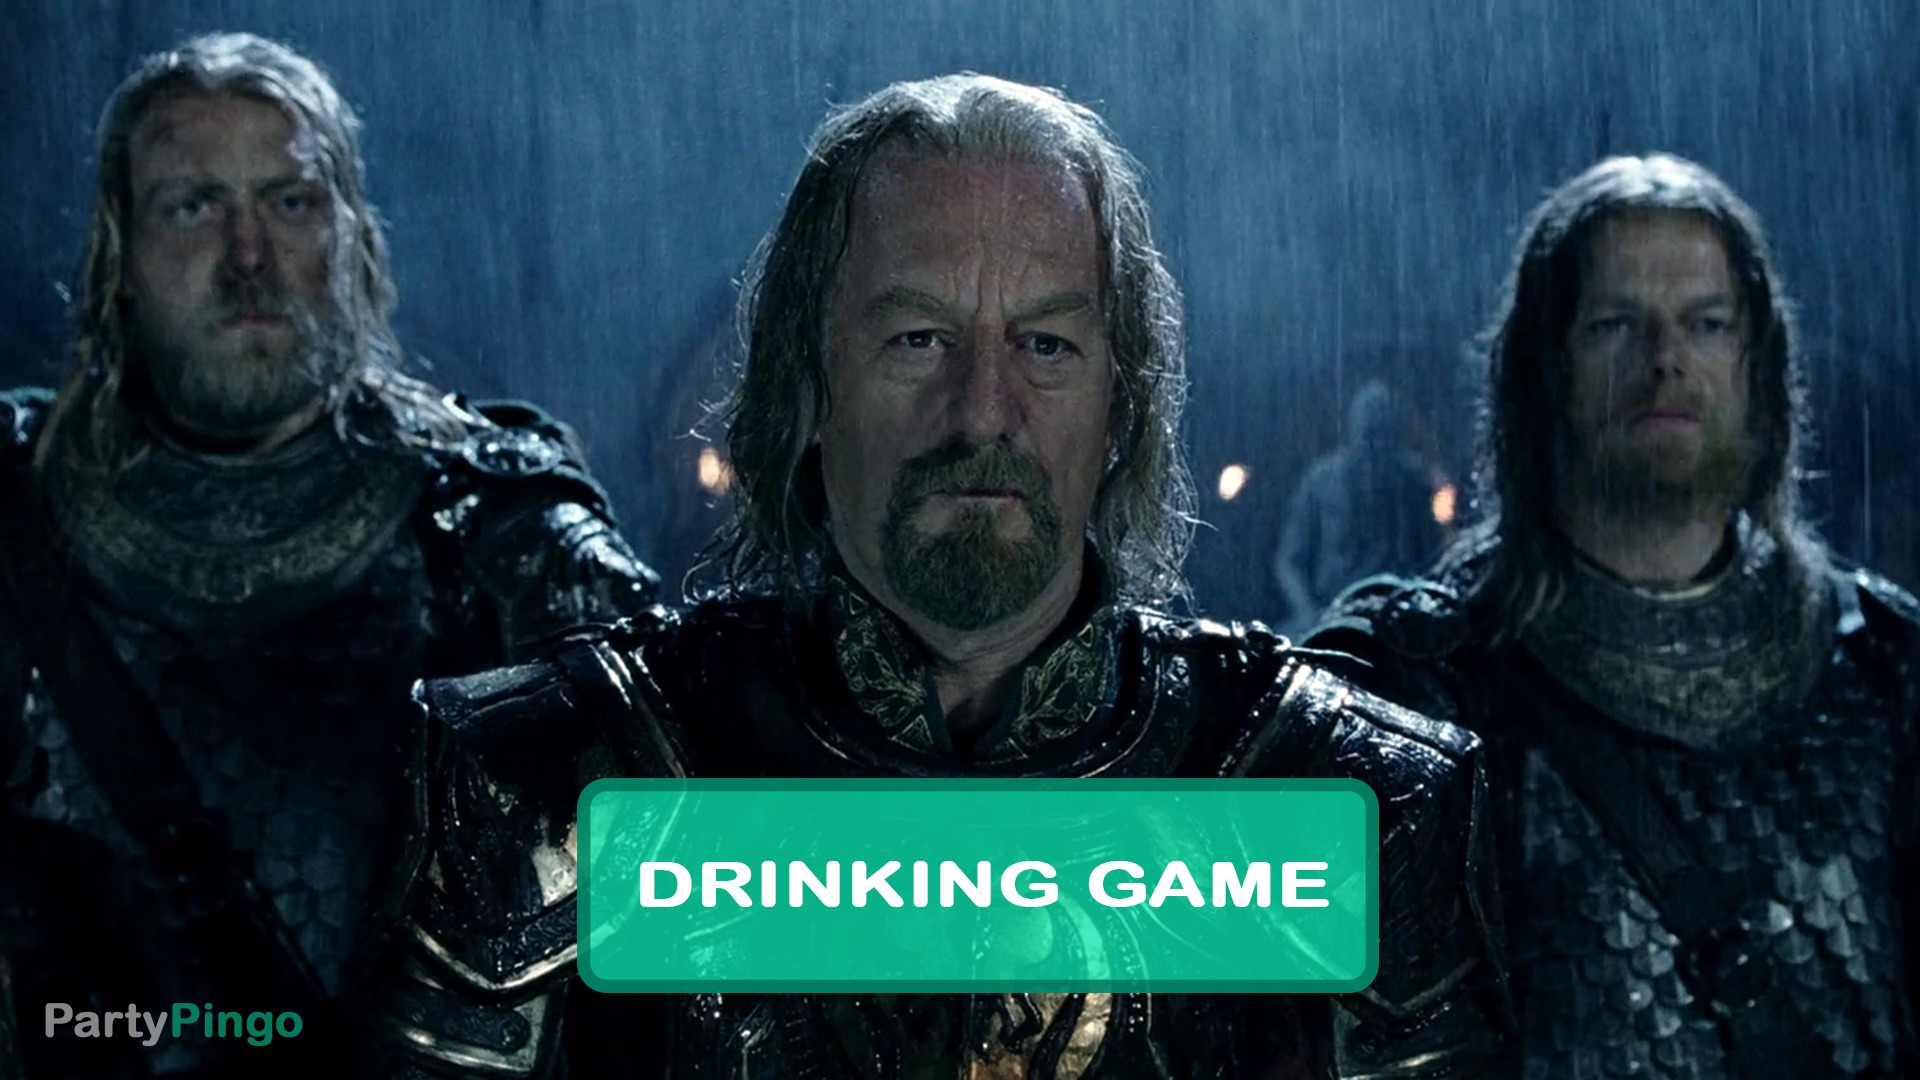 Lord of the Rings - The Two Towers Drinking Game